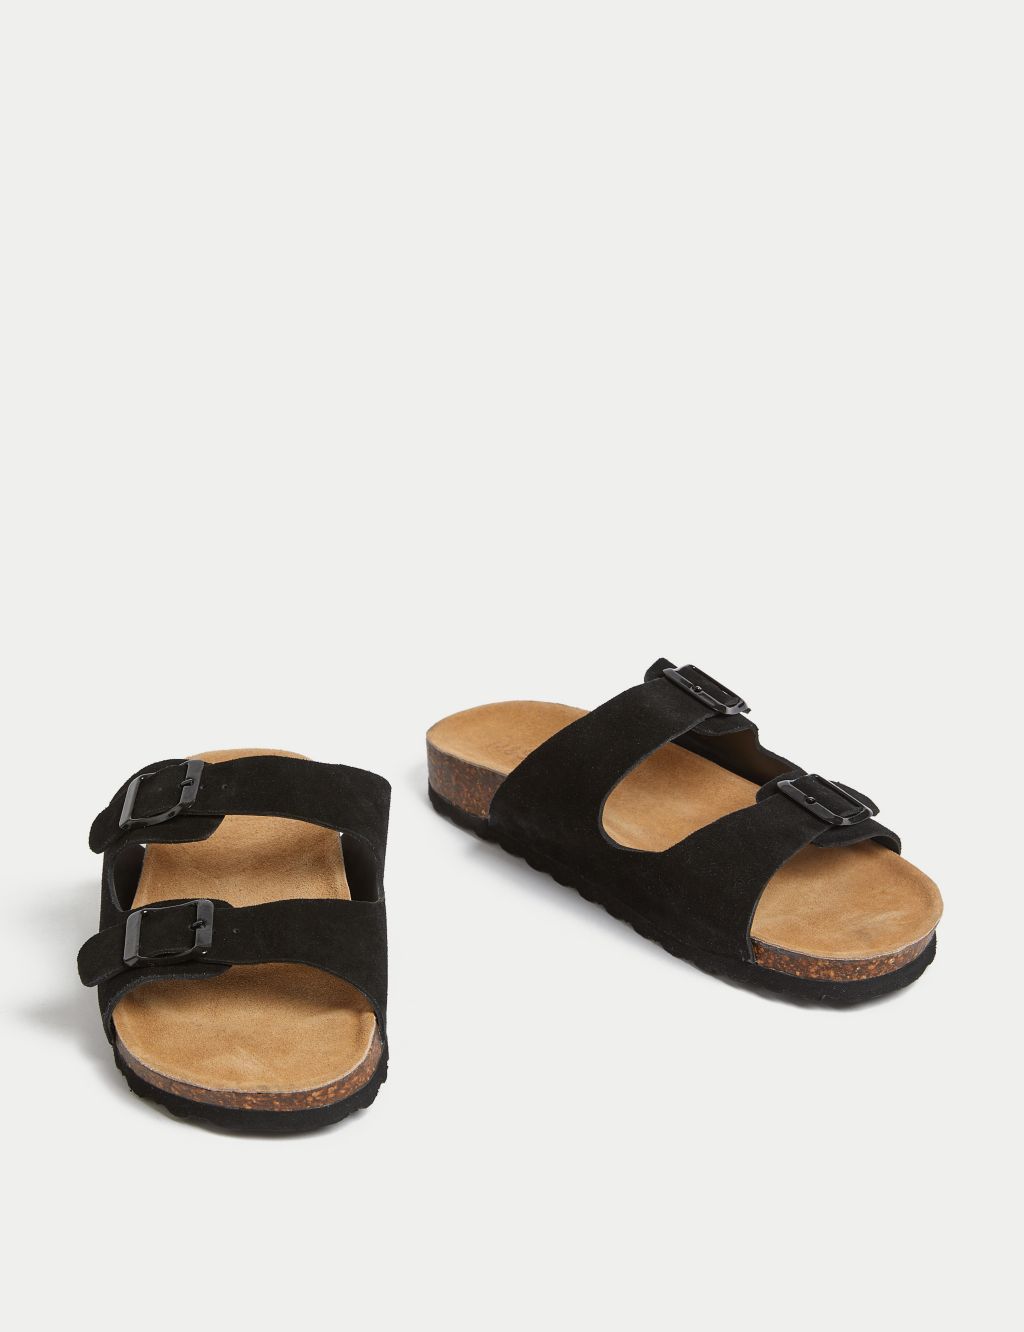 Suede Buckle Footbed Mules image 2